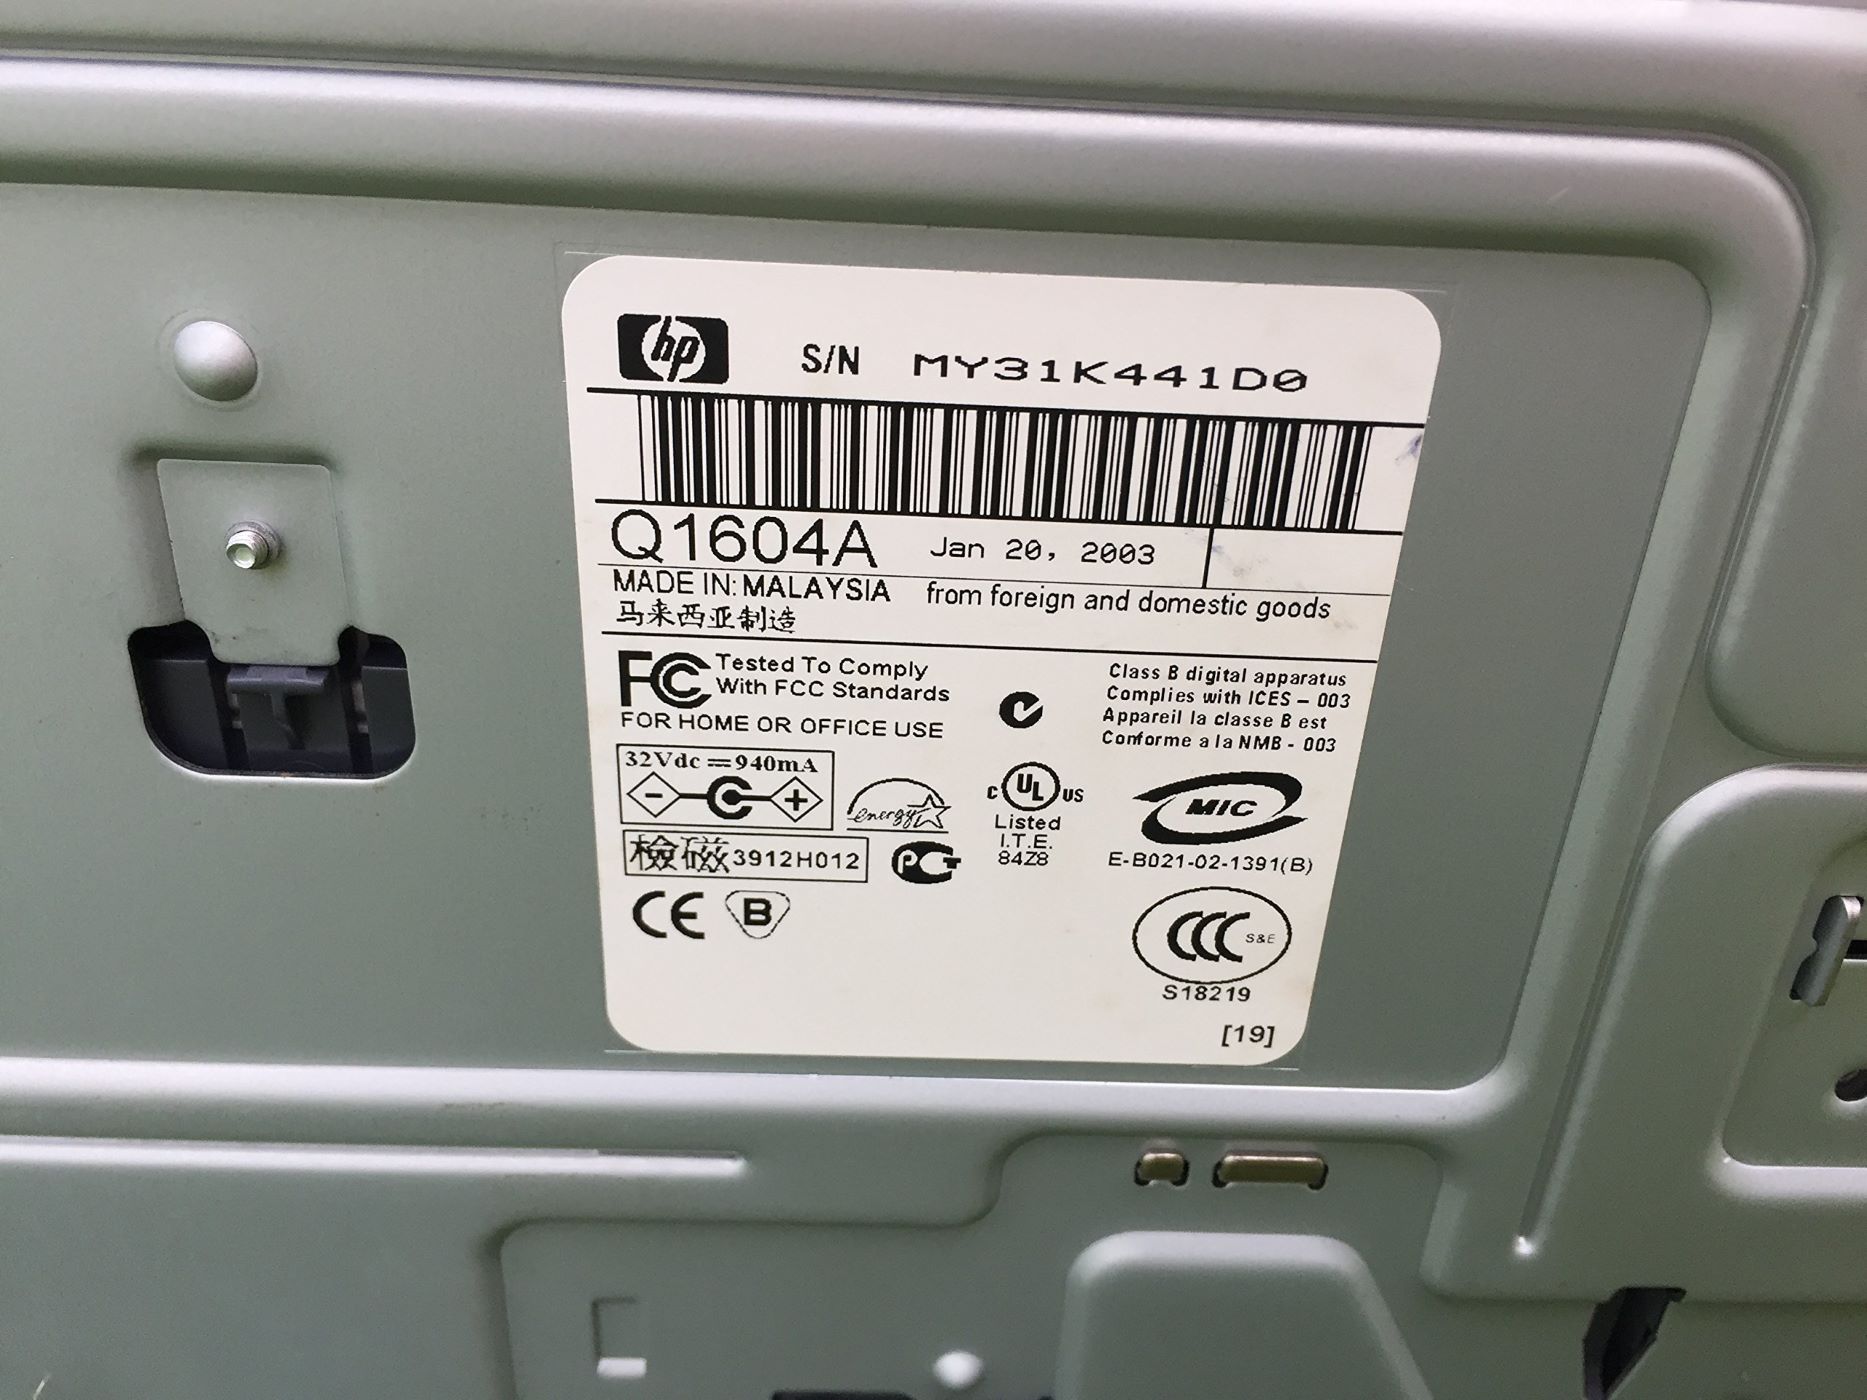 Where To Find Serial Number On HP Printer